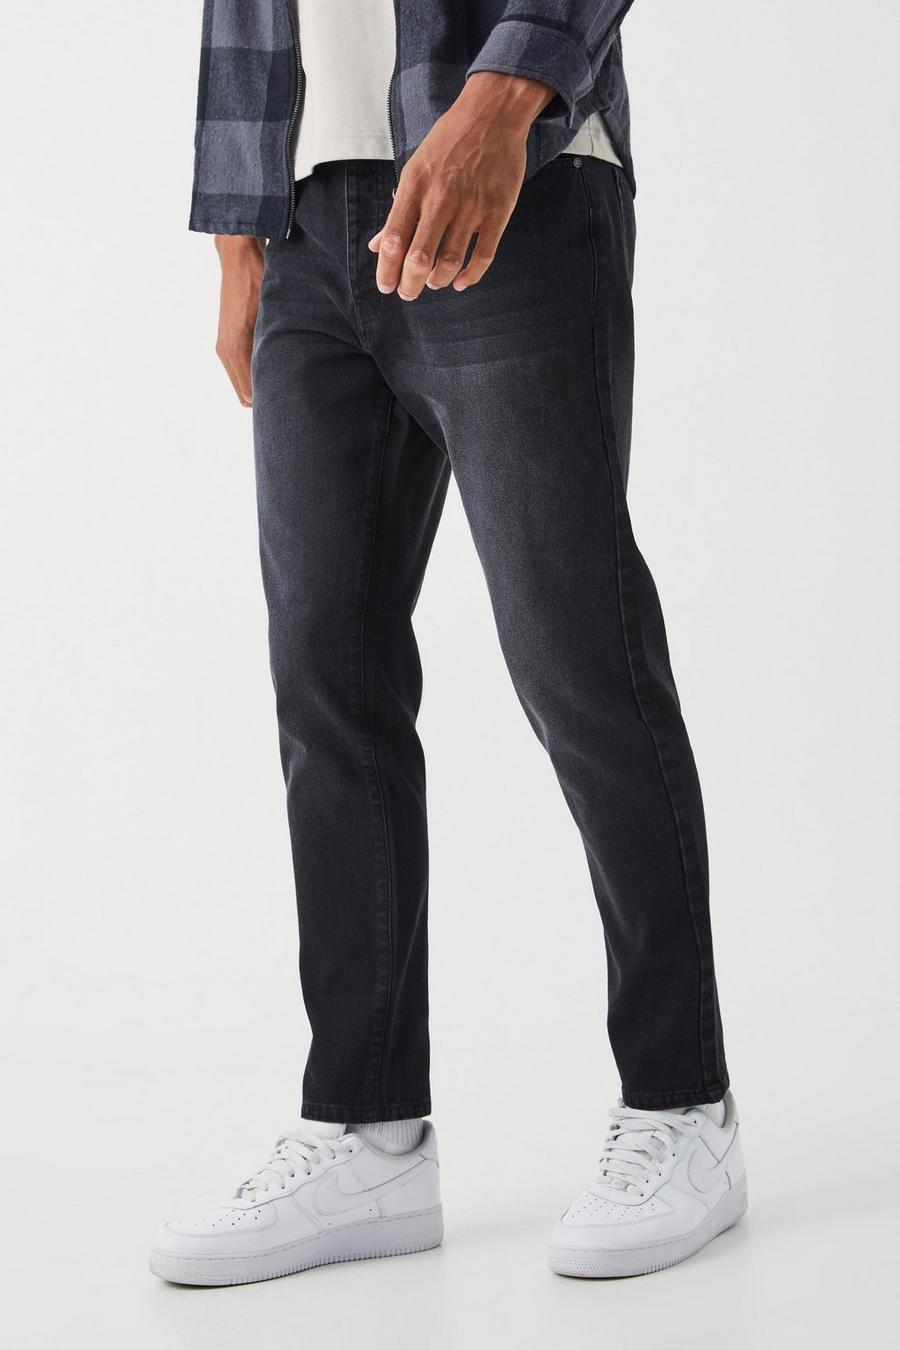 Washed black Tall Toelopende Onbewerkte Jeans